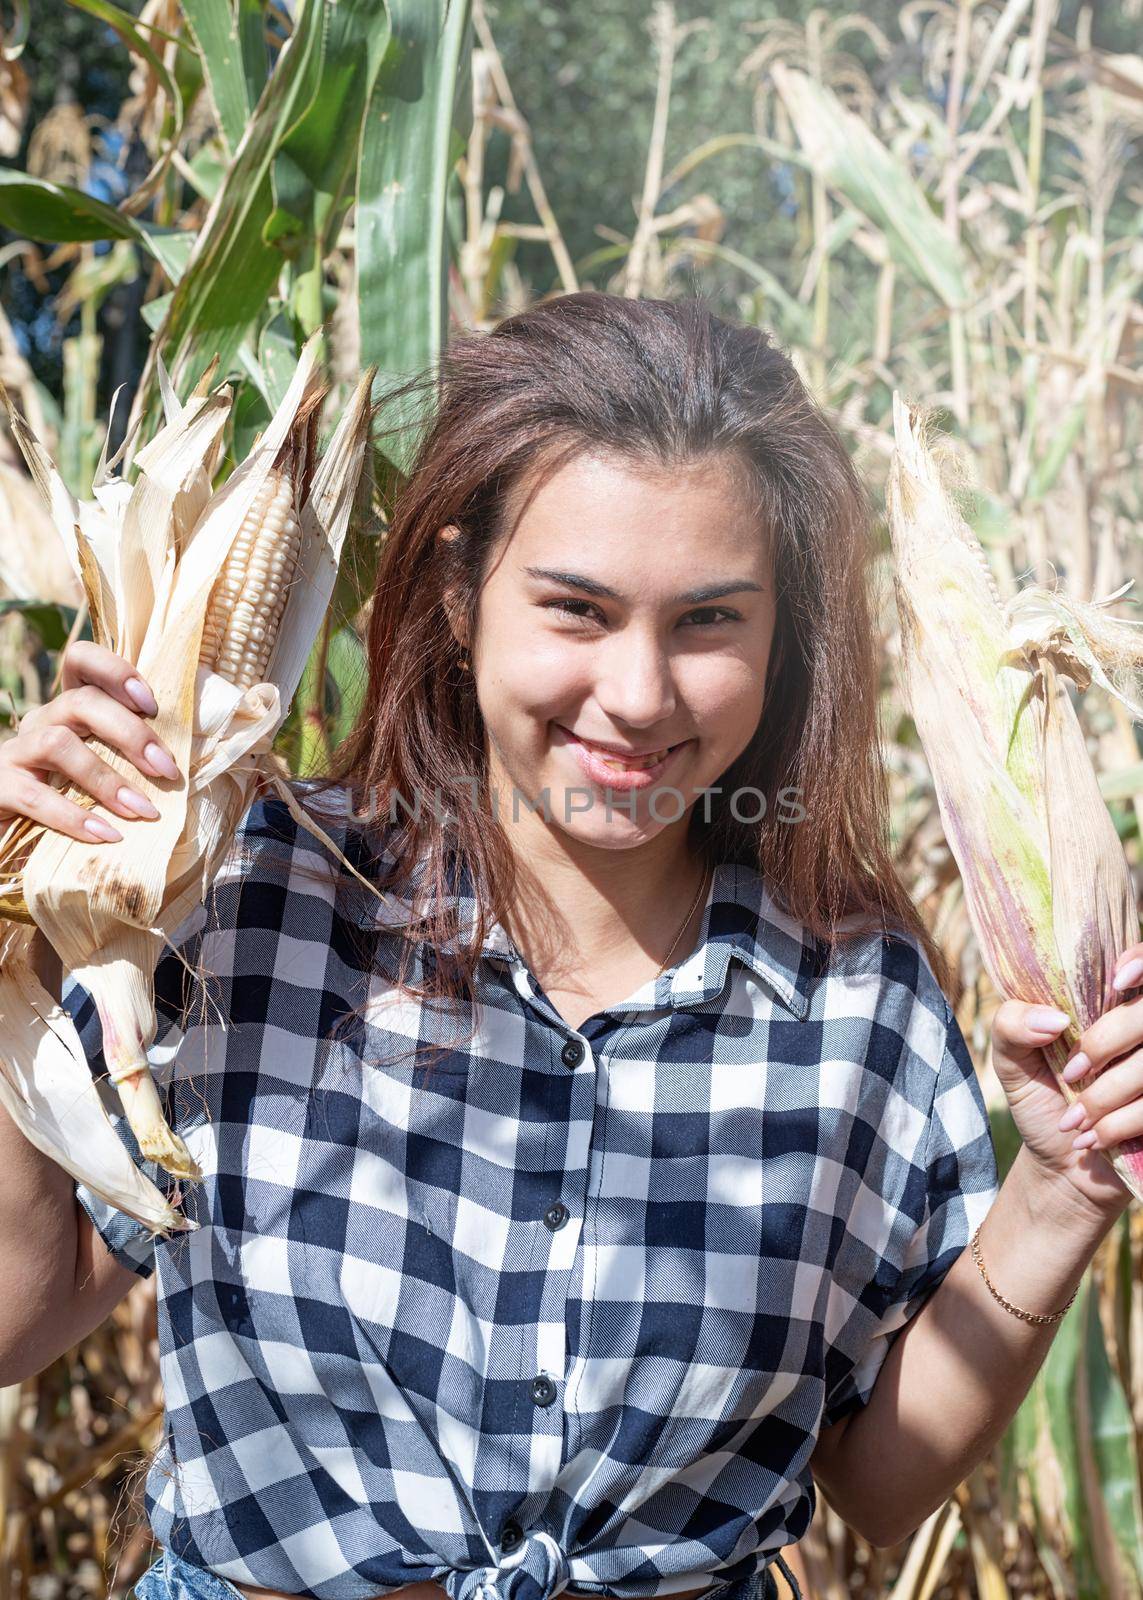 portrait of funny female woman in corn crop holding cobs making funny faces by Desperada